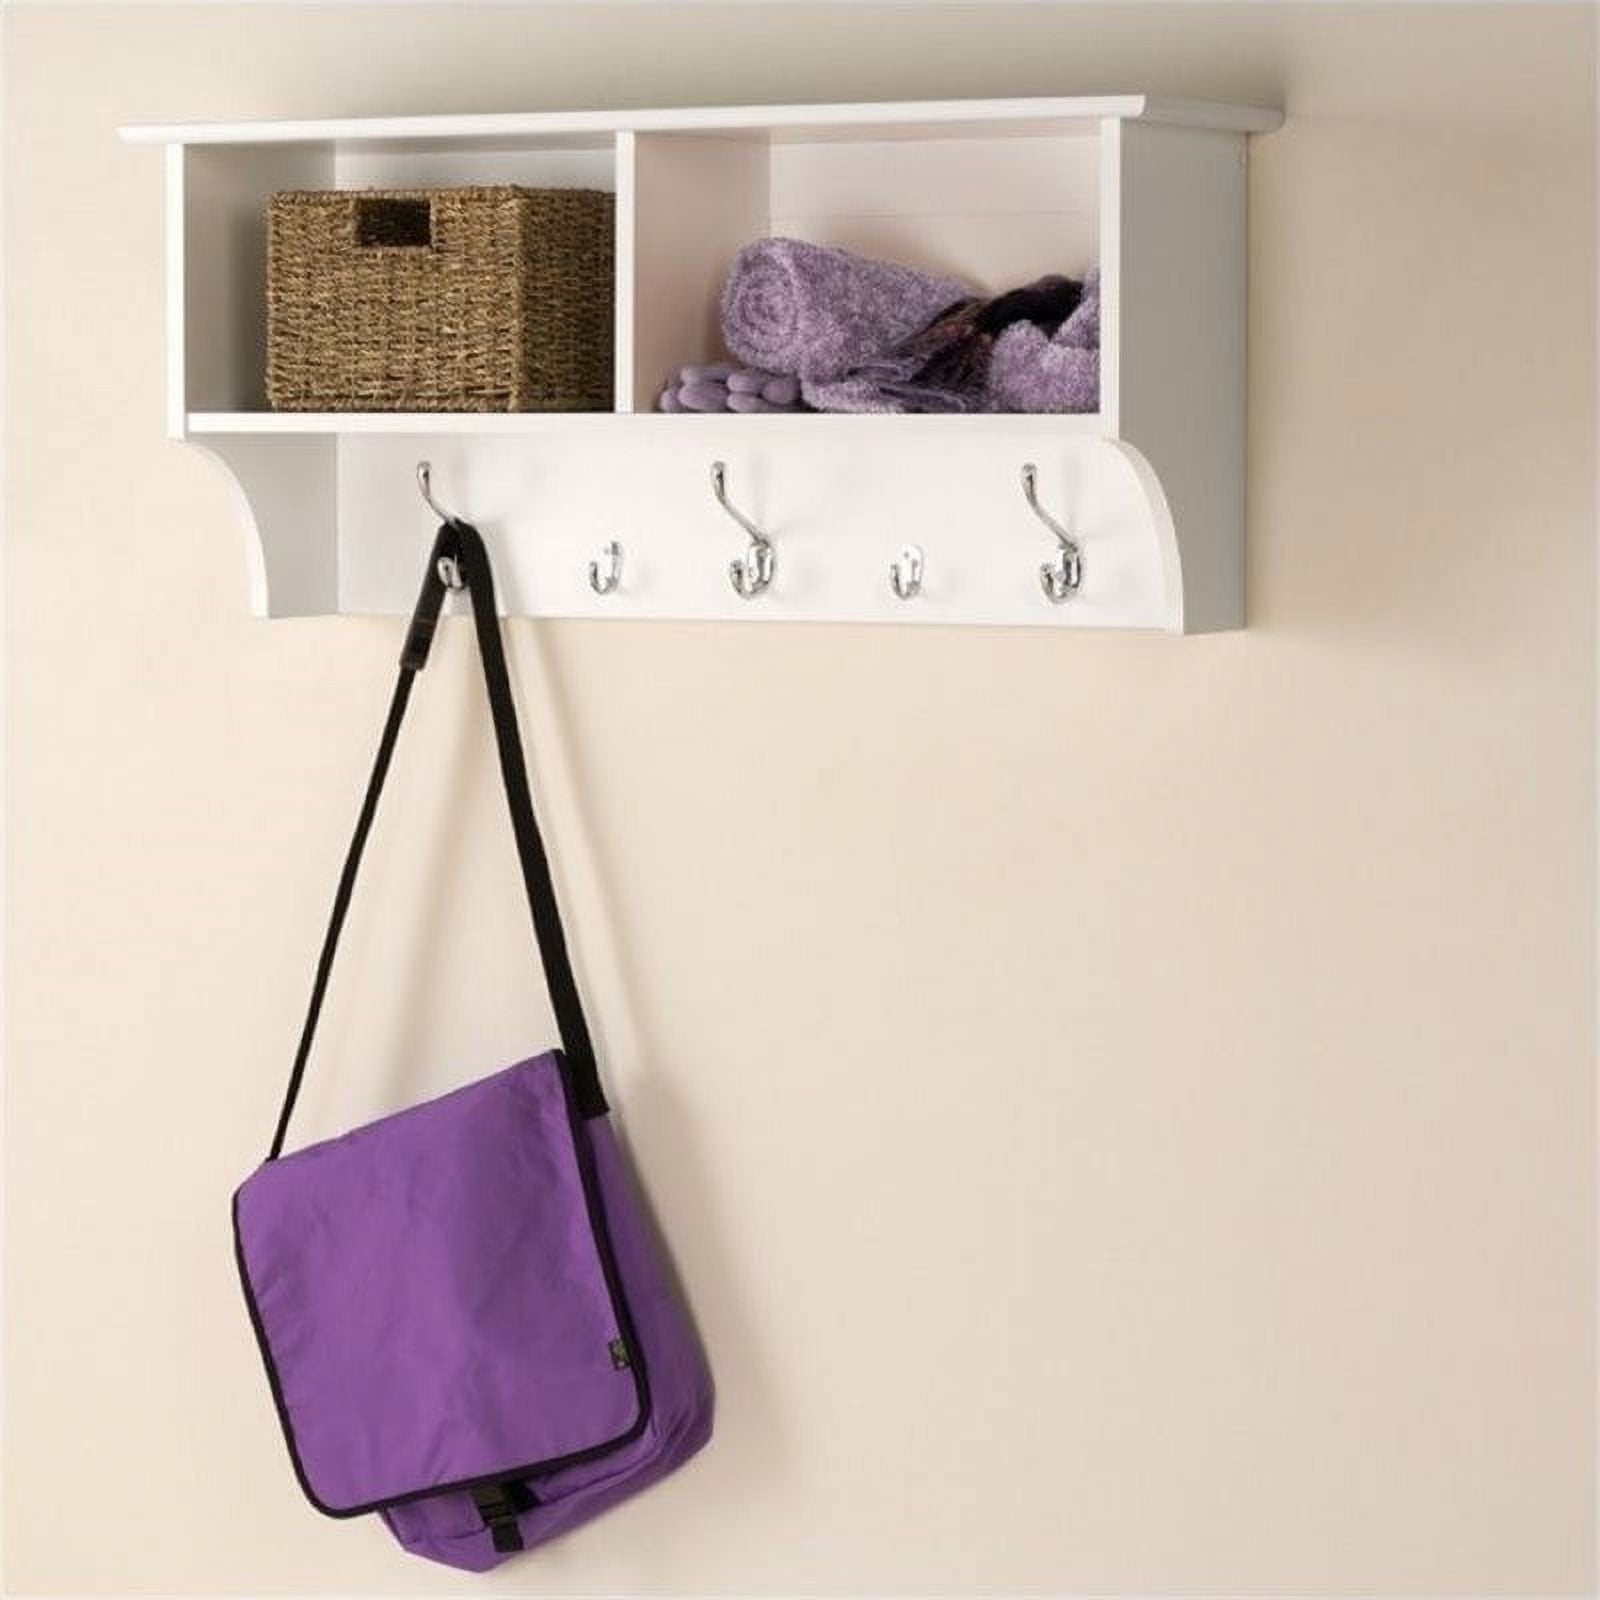 Pemberly Row White Wall Mounted Shoe Rack with Mirror